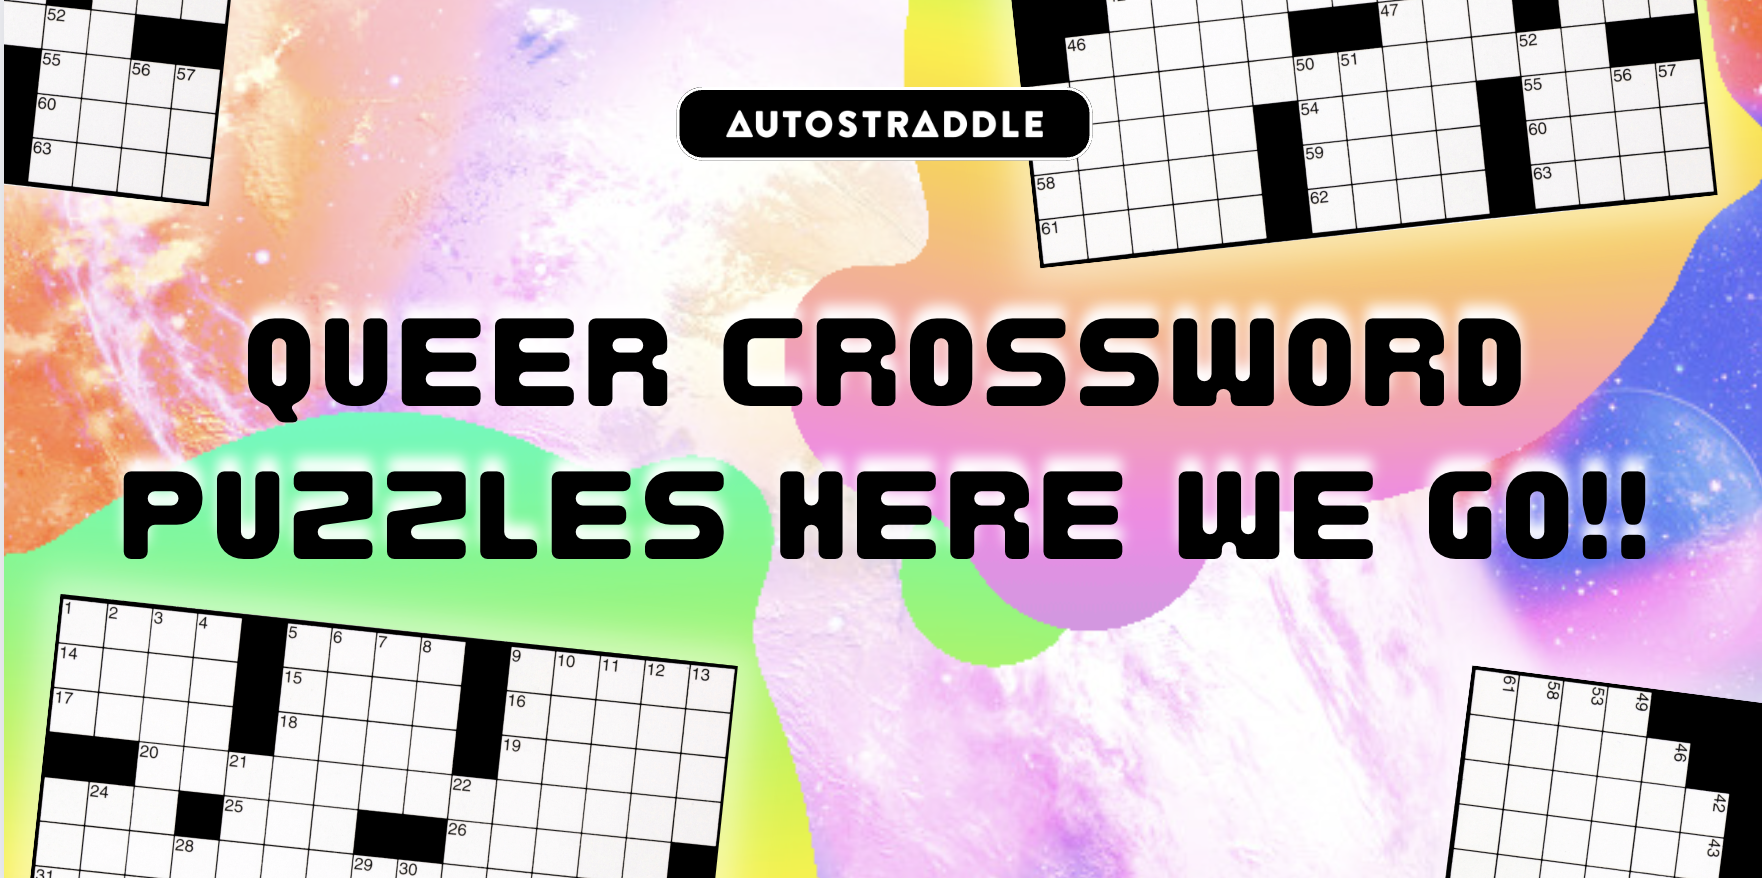 A colorful pink, purple and orange background with empty crossword puzzle grids scattered around. It reads "Queer Crossword Puzzles Here We Go!!"